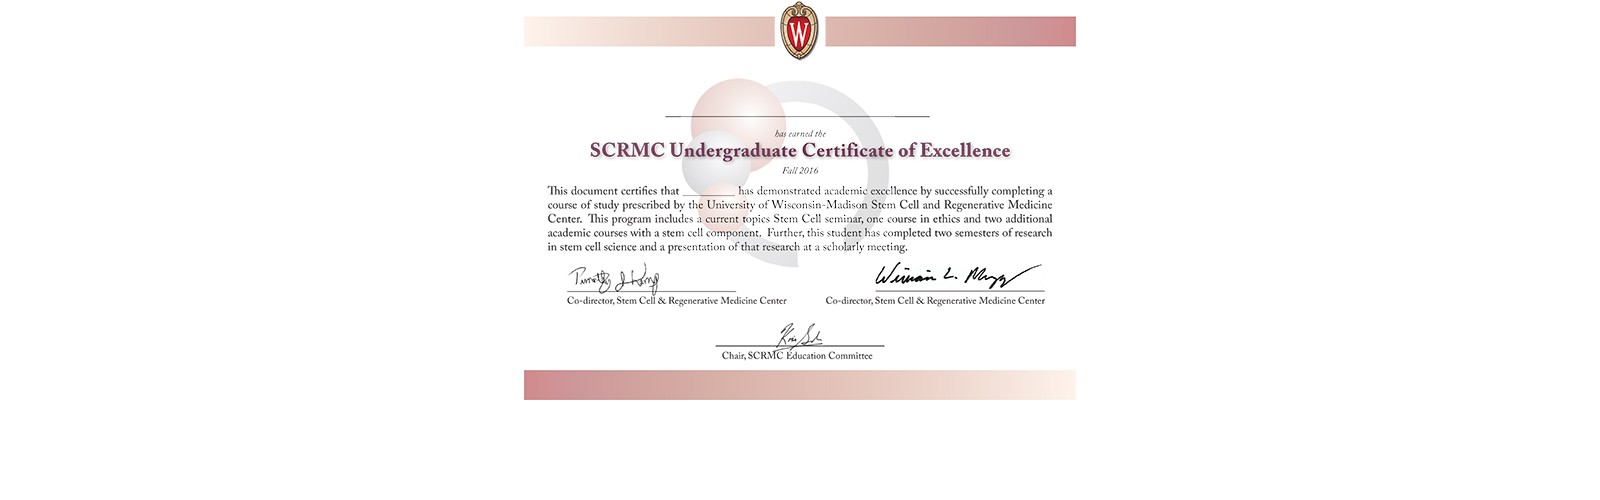 Undergraduate Certificate Of Excellence In Stem Cell Sciences Template